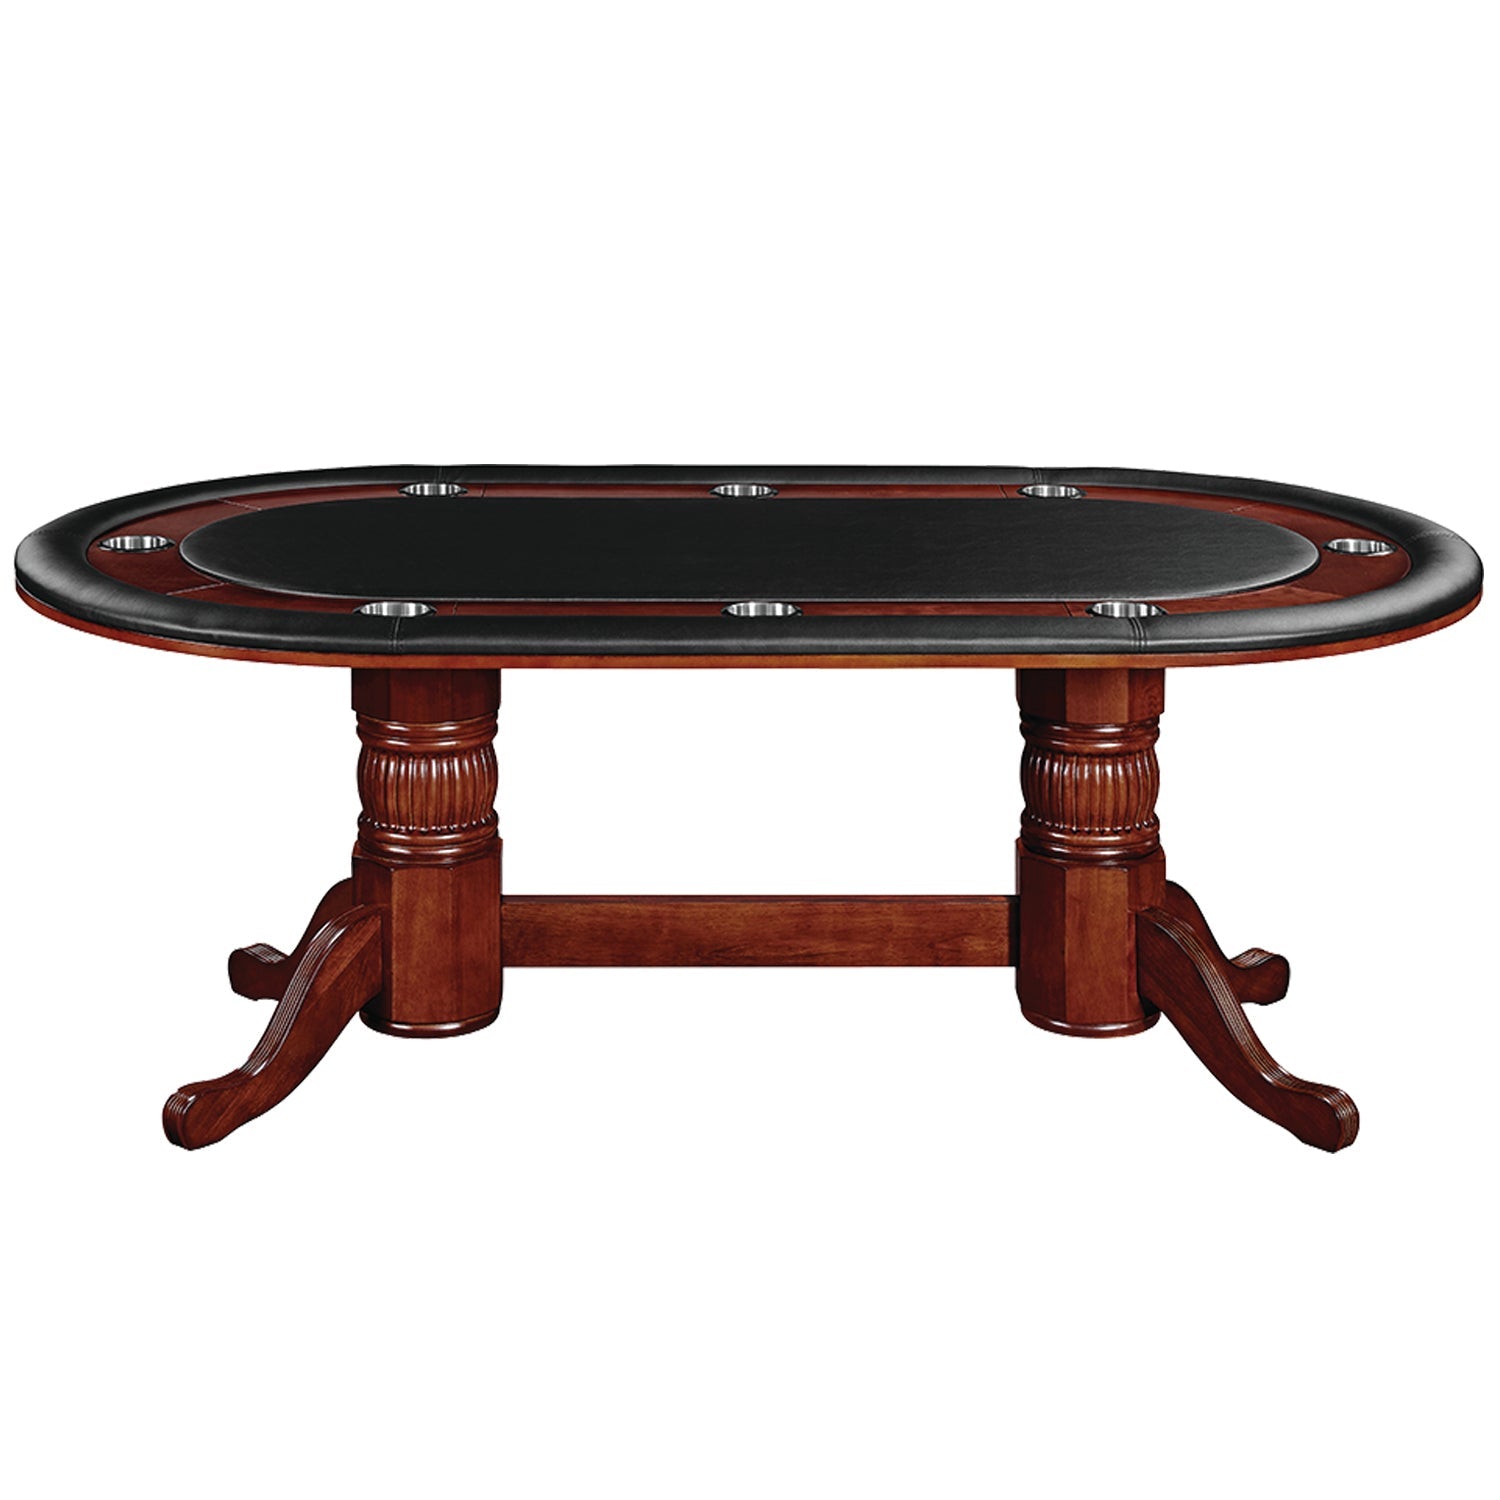 RAM Game Room Game Table 84" - The Bar Design